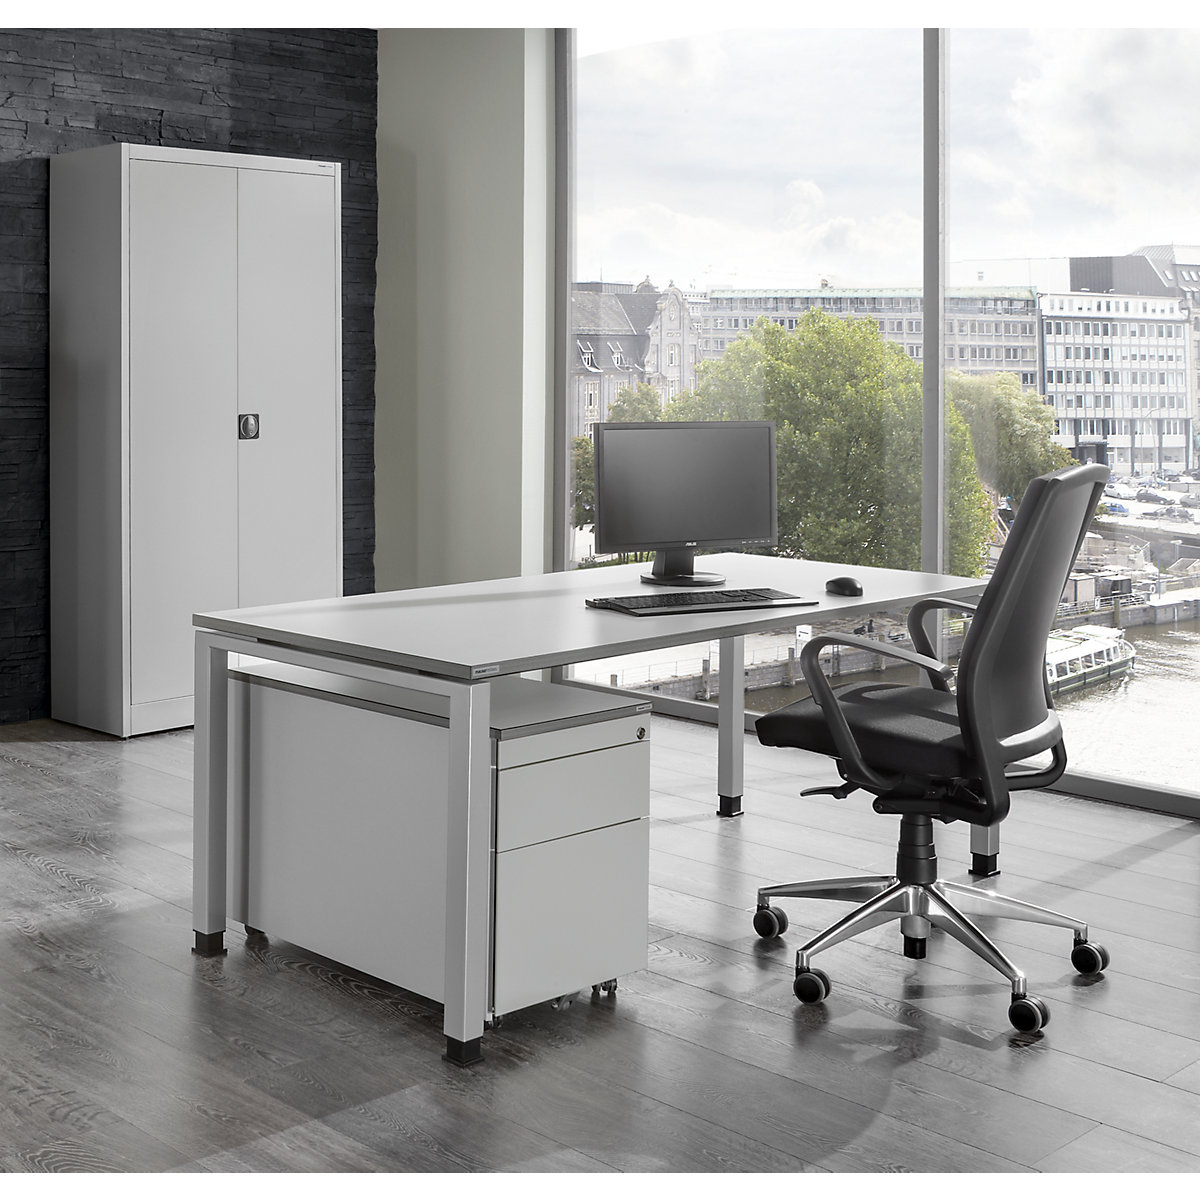 ARCOS complete office – mauser, desk, hinged door cupboard, mobile drawer unit with suspension file drawer, light grey